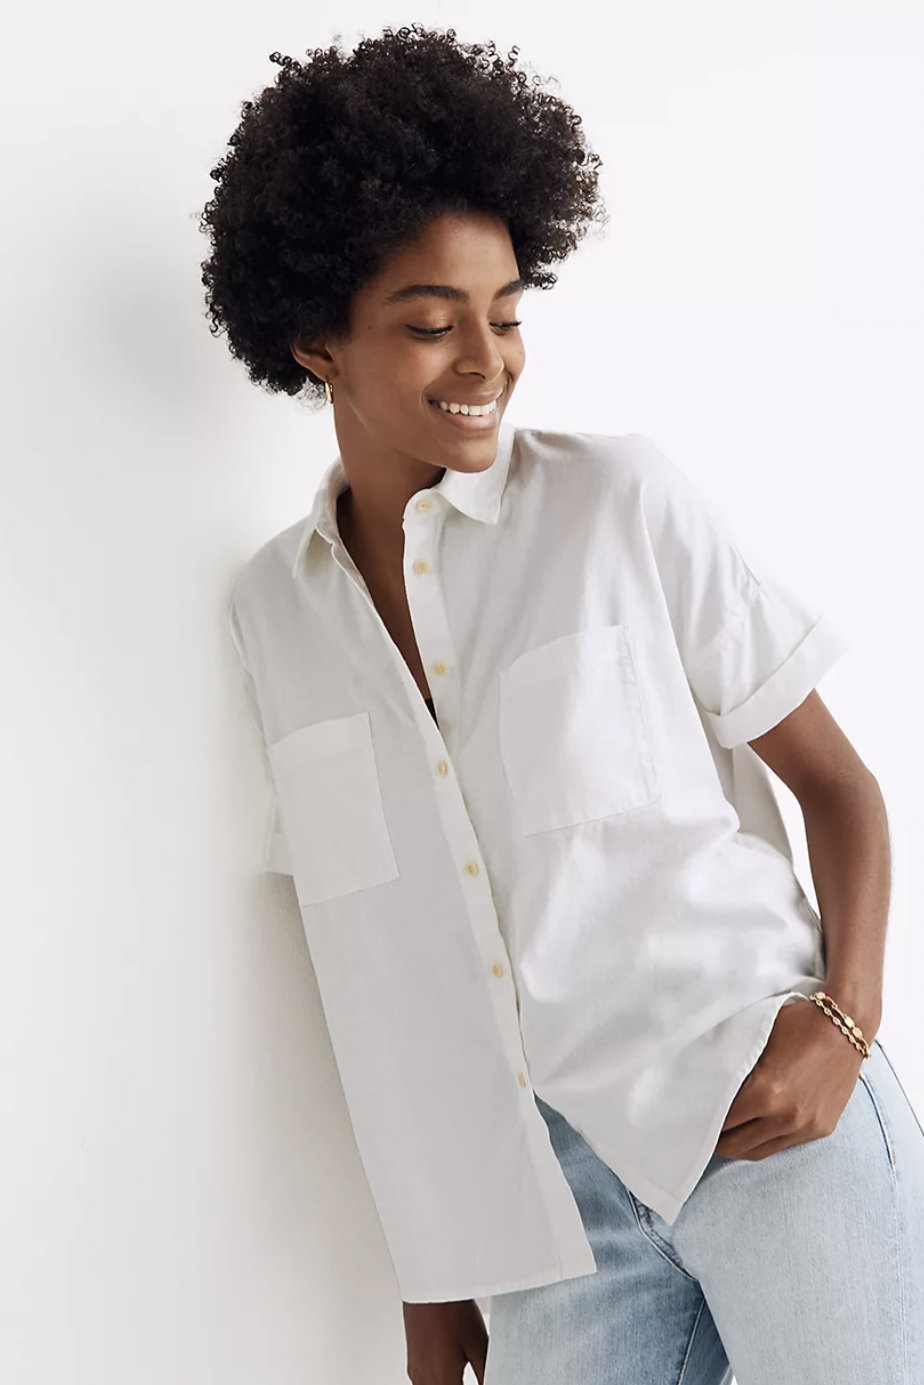 Gap, Everlane, Cos, Reformation: The Very Best White Button-Down